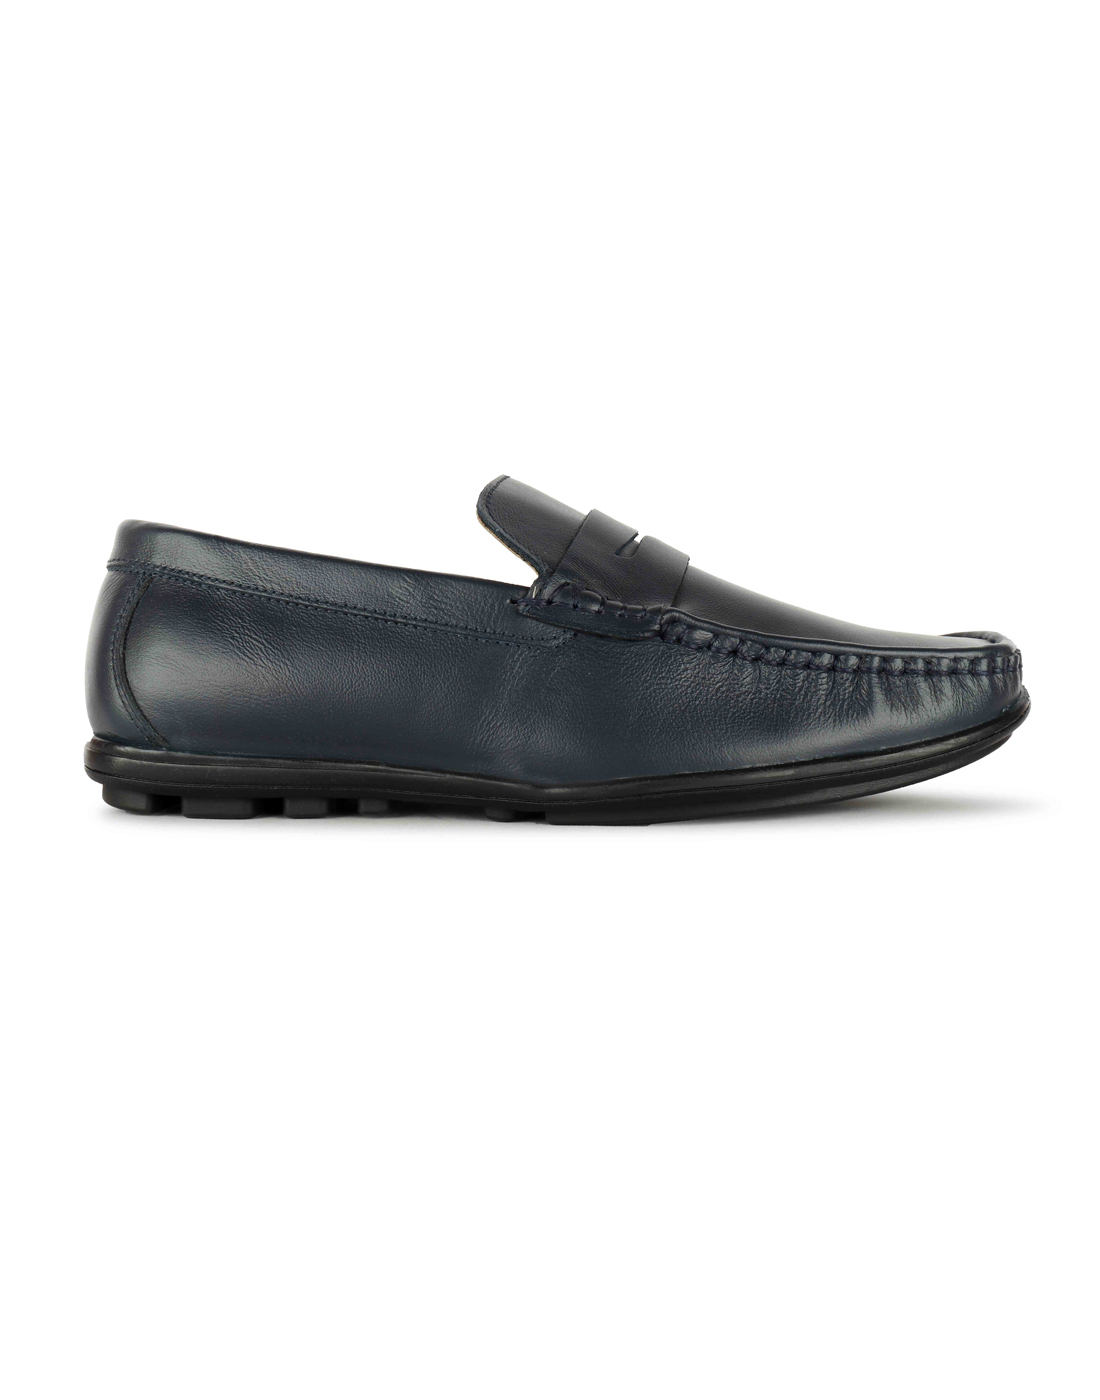 Blue Loafers - Buy Blue Pure Leather Loafers @ Rs.1800 Only | Agra Shoe ...